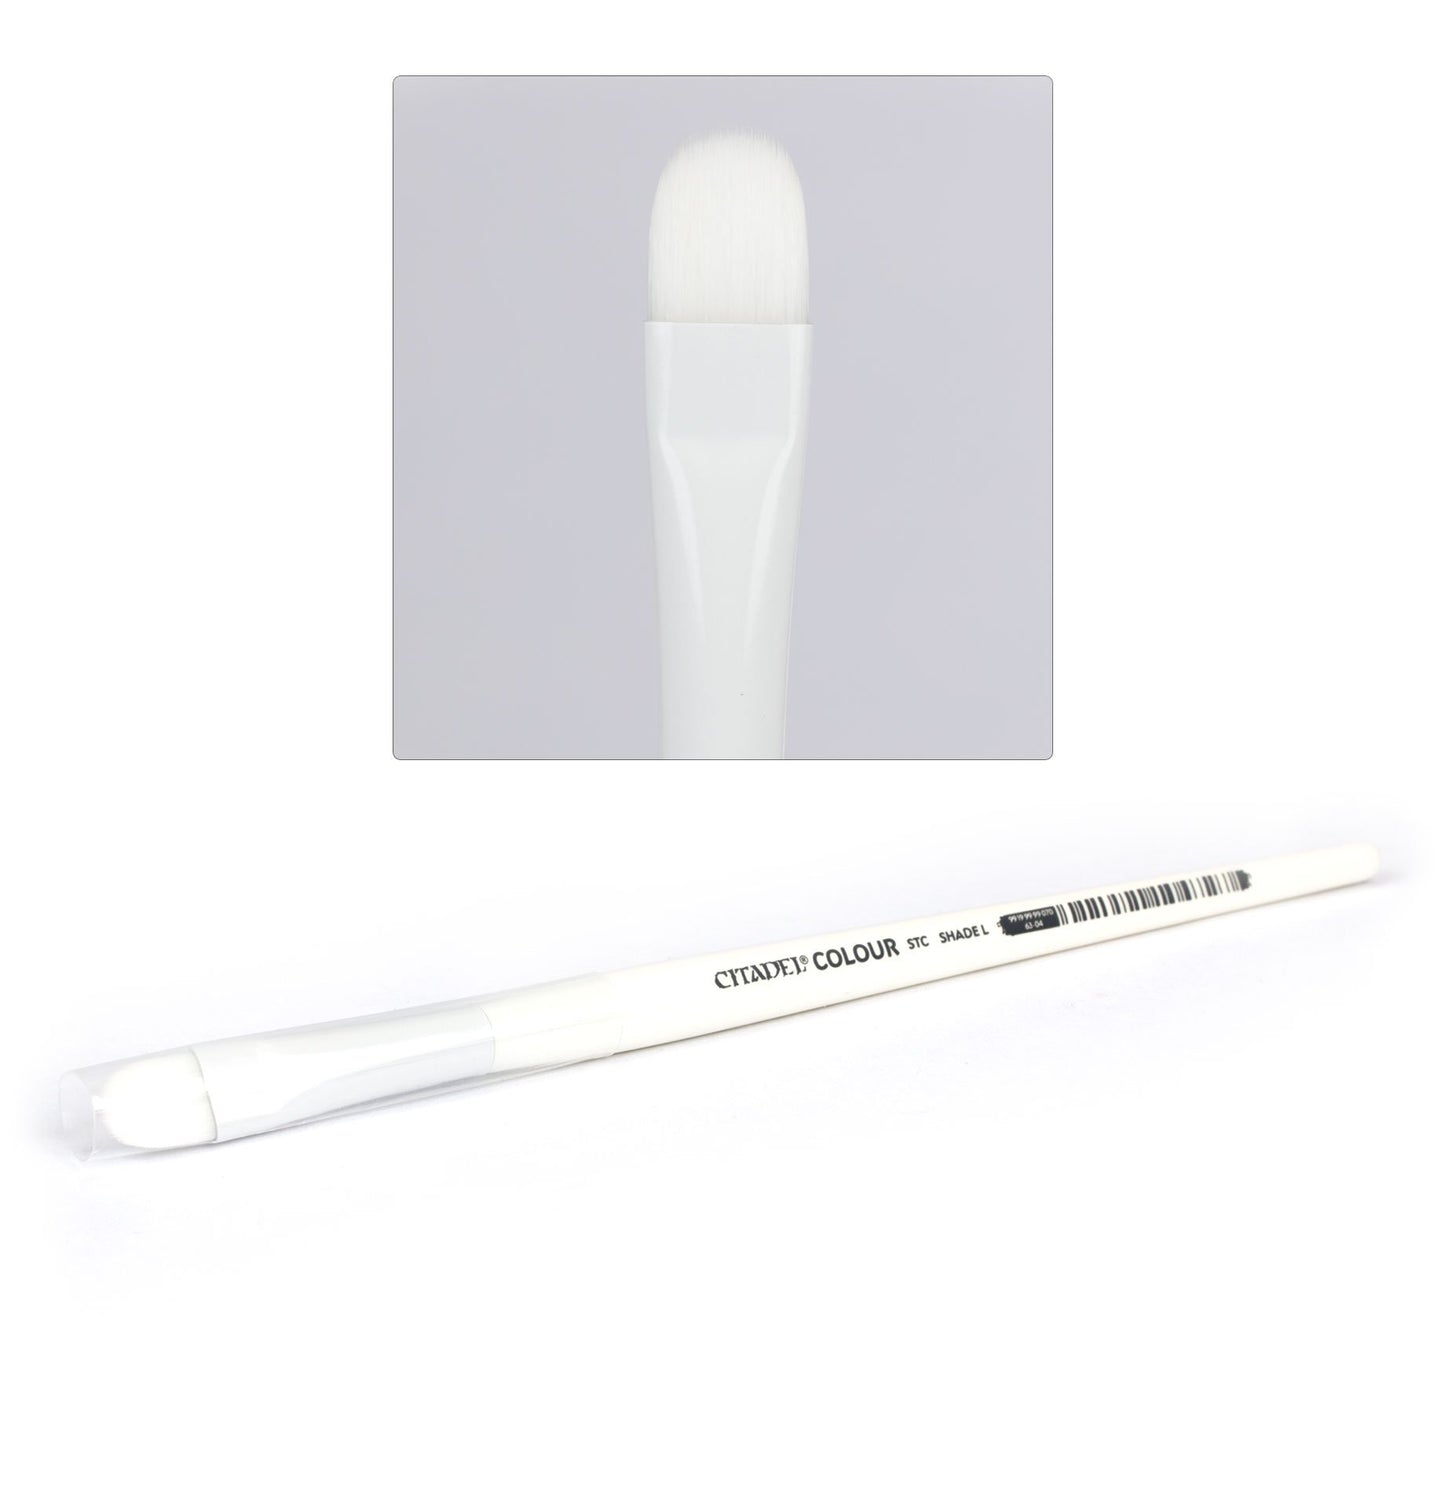 Synthetic STC Shade Brush